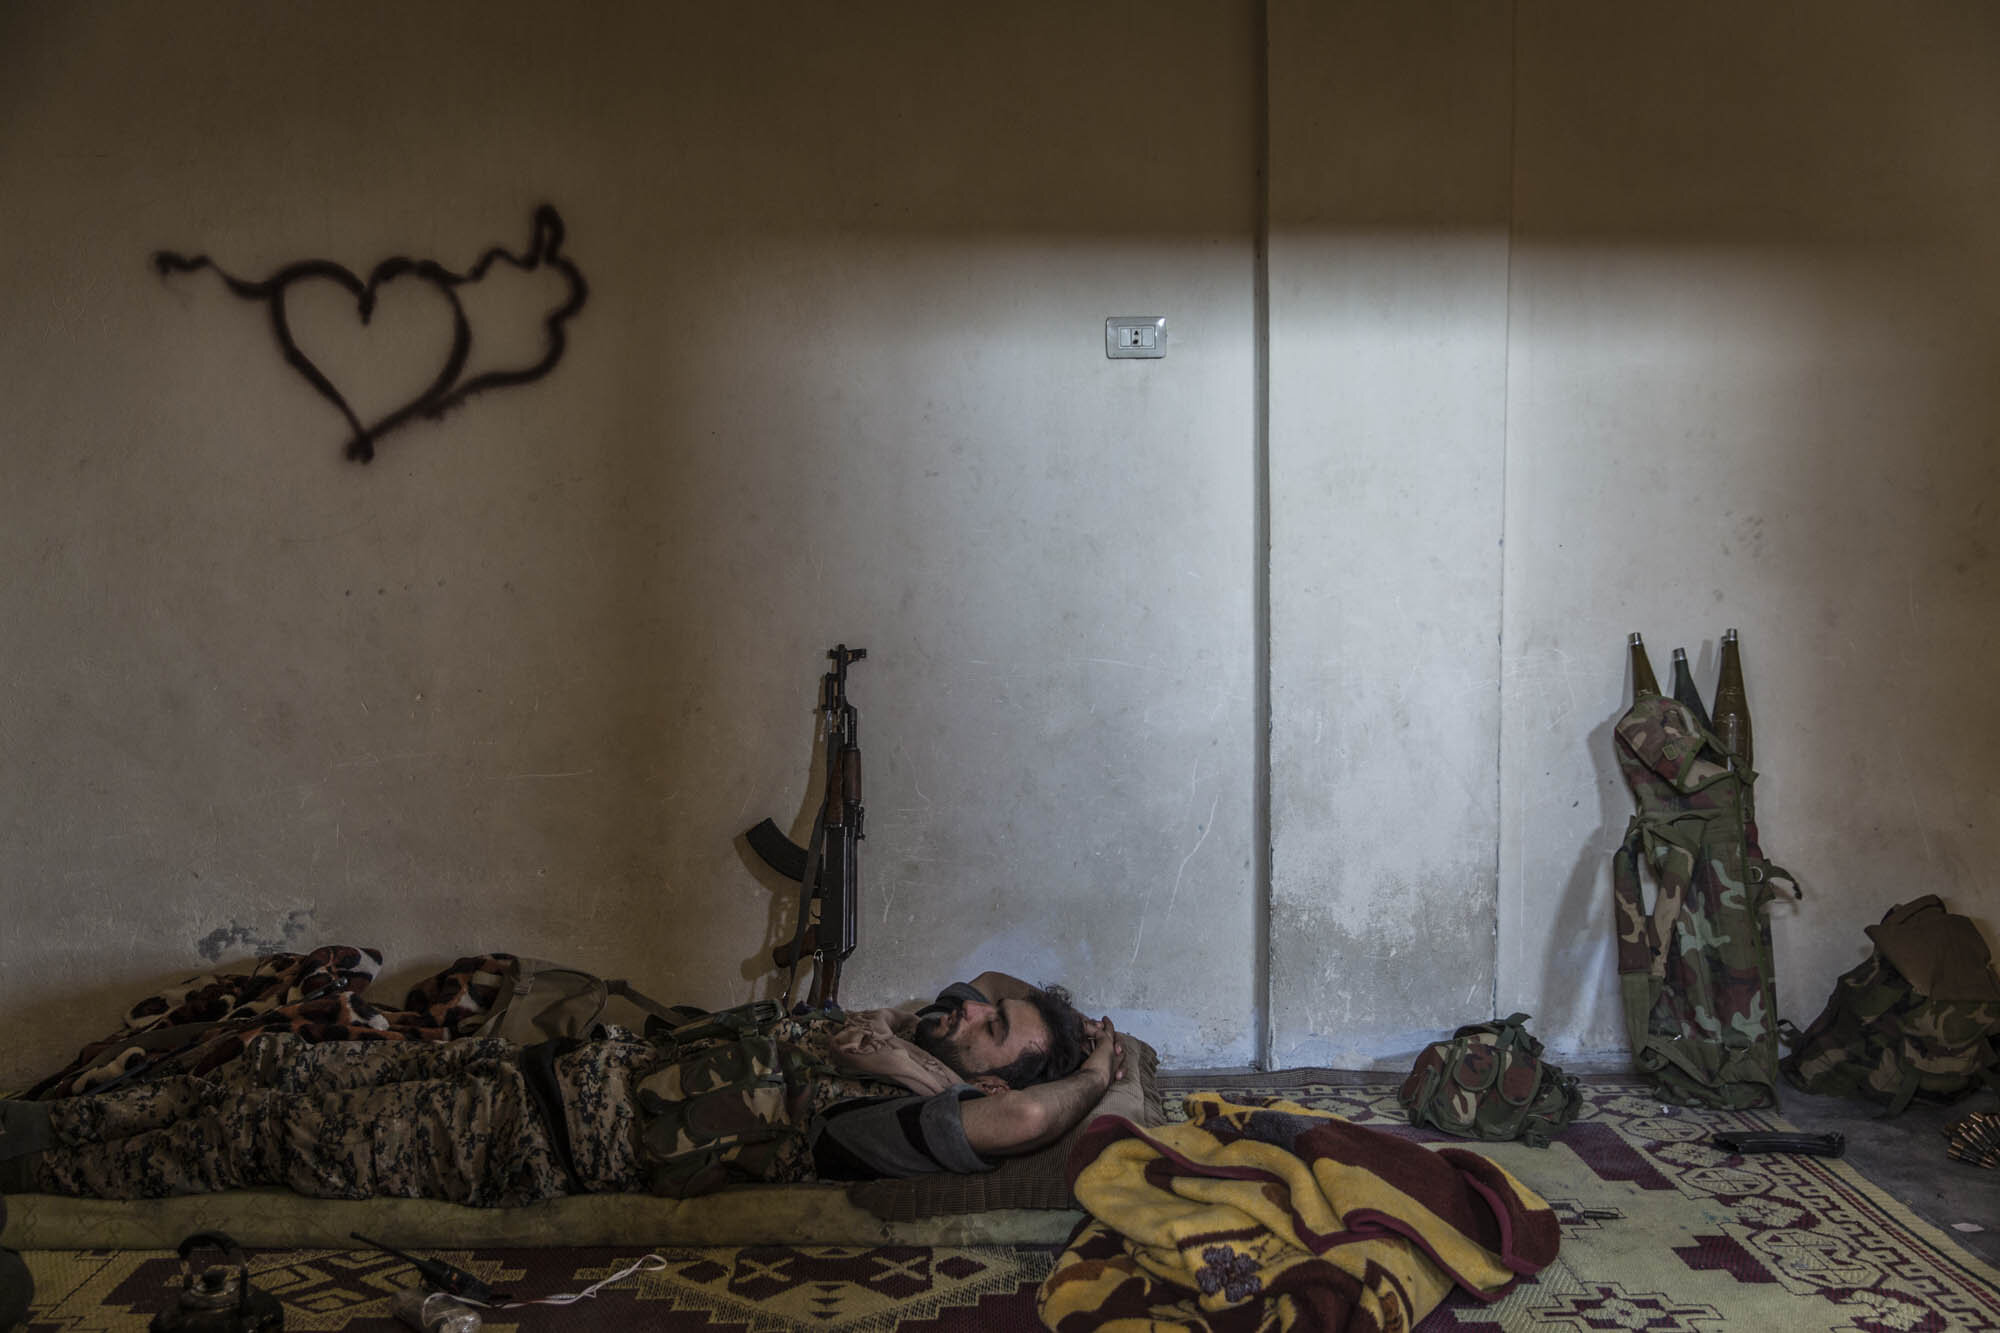  An SDF soldier rested at a base near the frontline in east Raqqa just days before the city fell. Syria - October 2017 